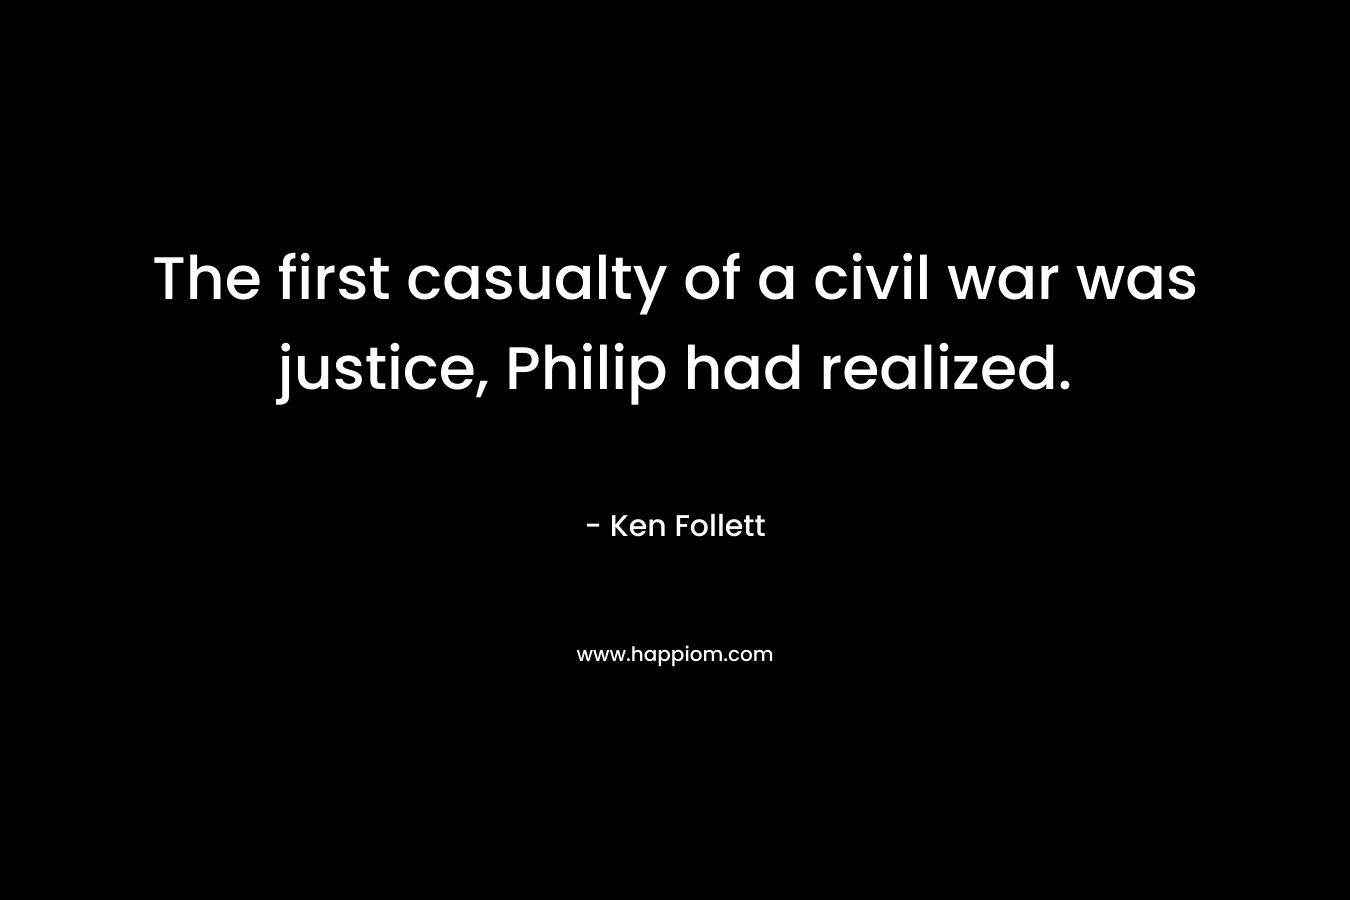 The first casualty of a civil war was justice, Philip had realized.